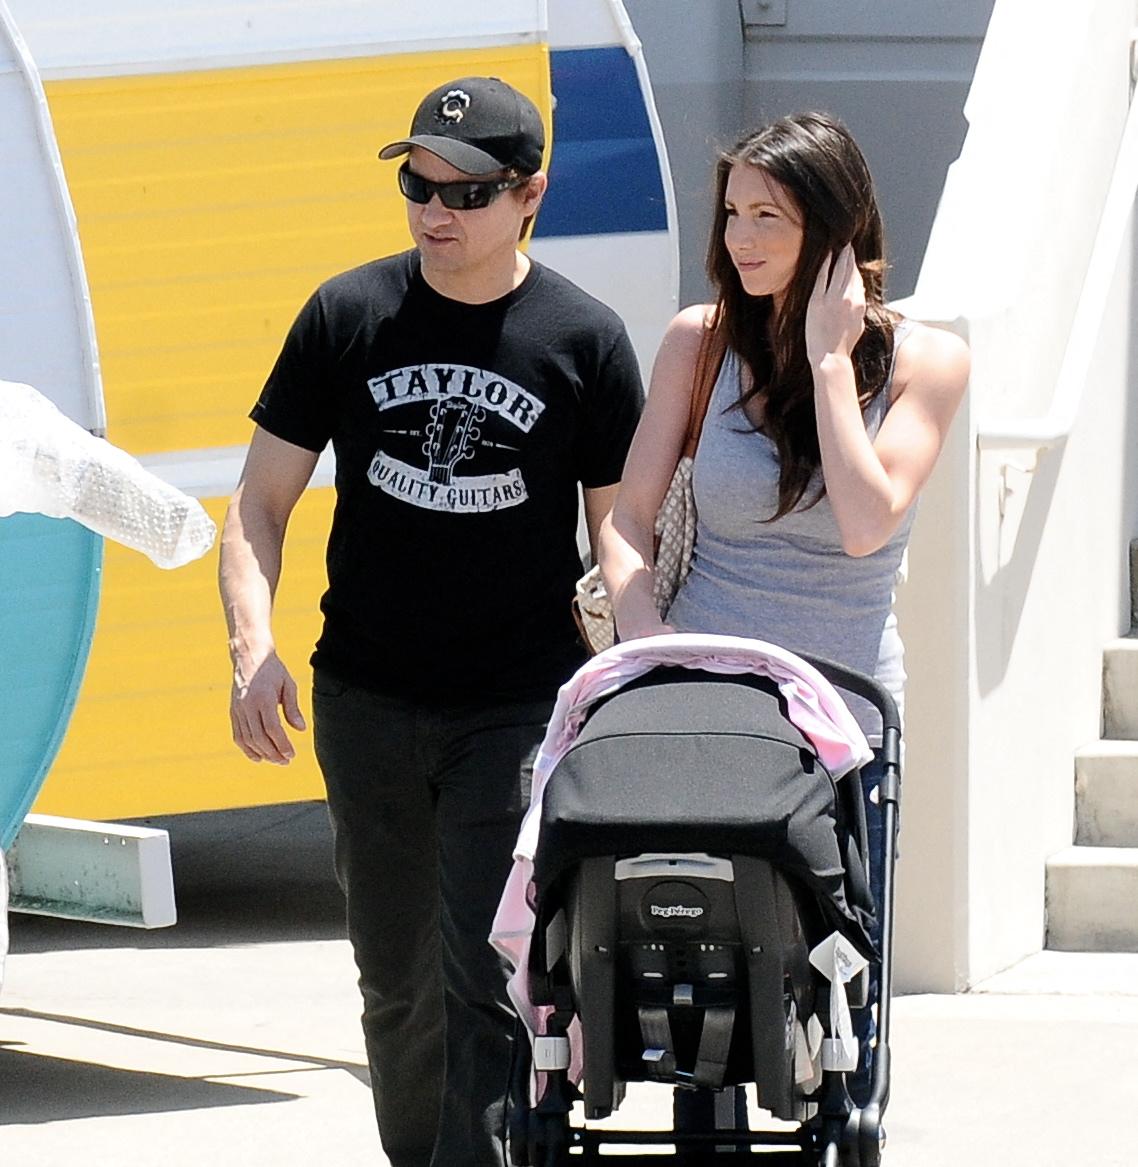 Jeremy Renner spotted with his 2-month-old baby daughter Ava Berlin Renner and ex-girlfriend Sonni Pacheco in downtown L.A. The trio was out shopping and spending some quality time together after Renner's finished working on his new movie for the